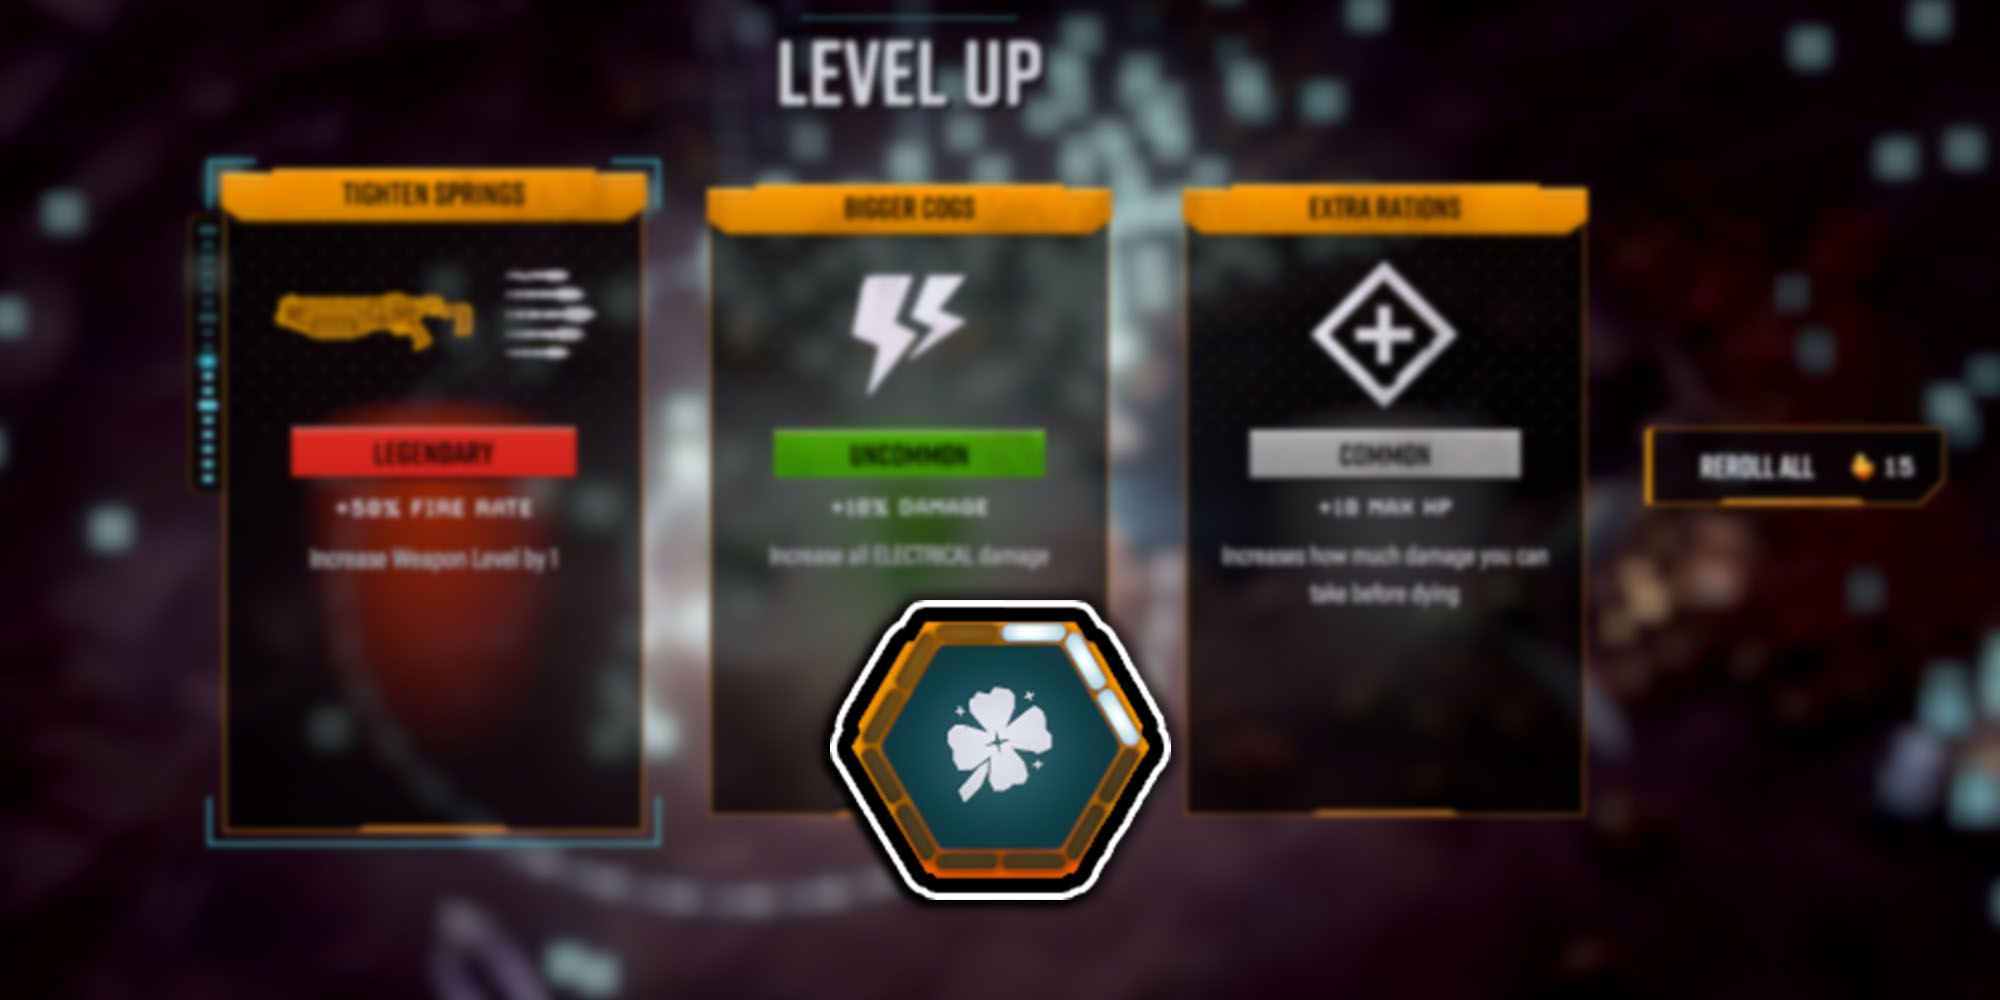 Deep Rock Galactic Survivor - Luck Stat Icon Over Image Of Legendary Level Up Upgrade